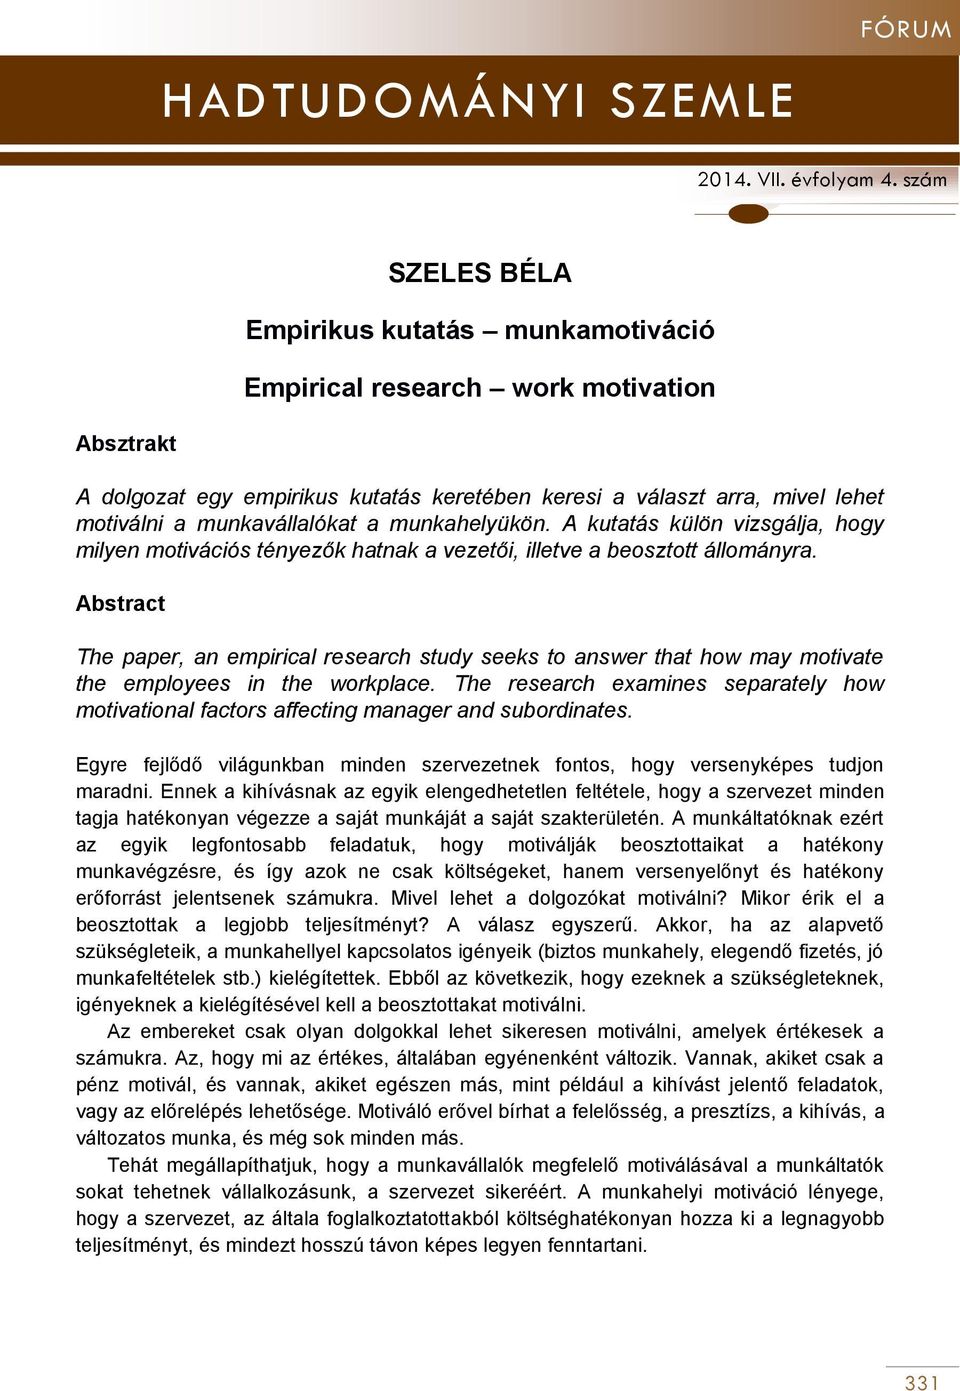 Abstract The paper, an empirical research study seeks to answer that how may motivate the employees in the workplace.